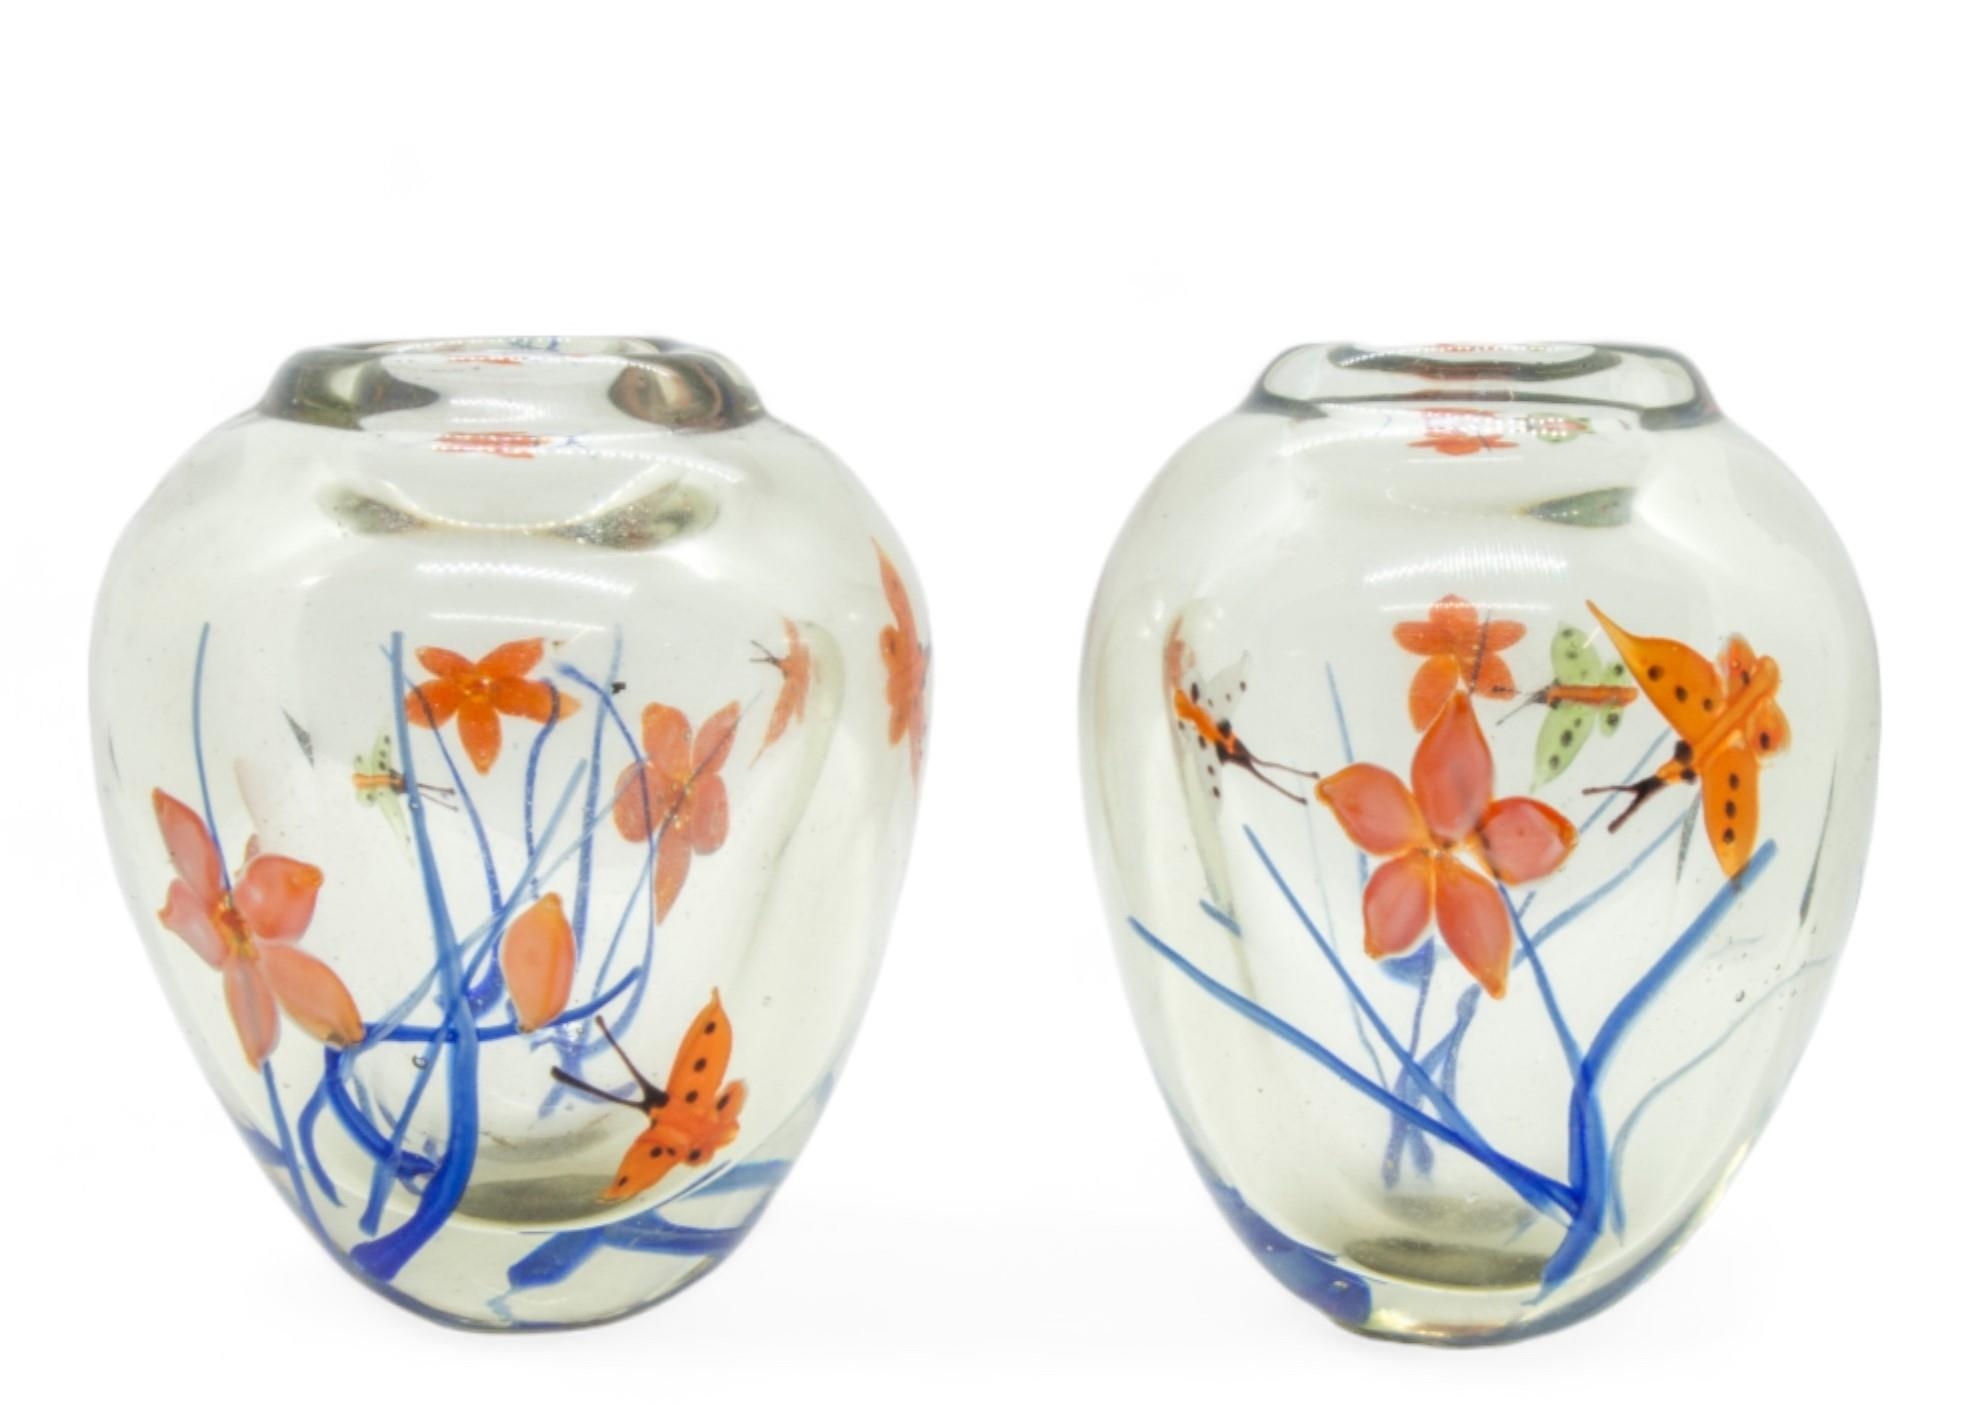 A PAIR OF VINTAGE CONTINENTAL GLASS BALUSTER VASES, with reverse painted decoration depicting - Image 2 of 2